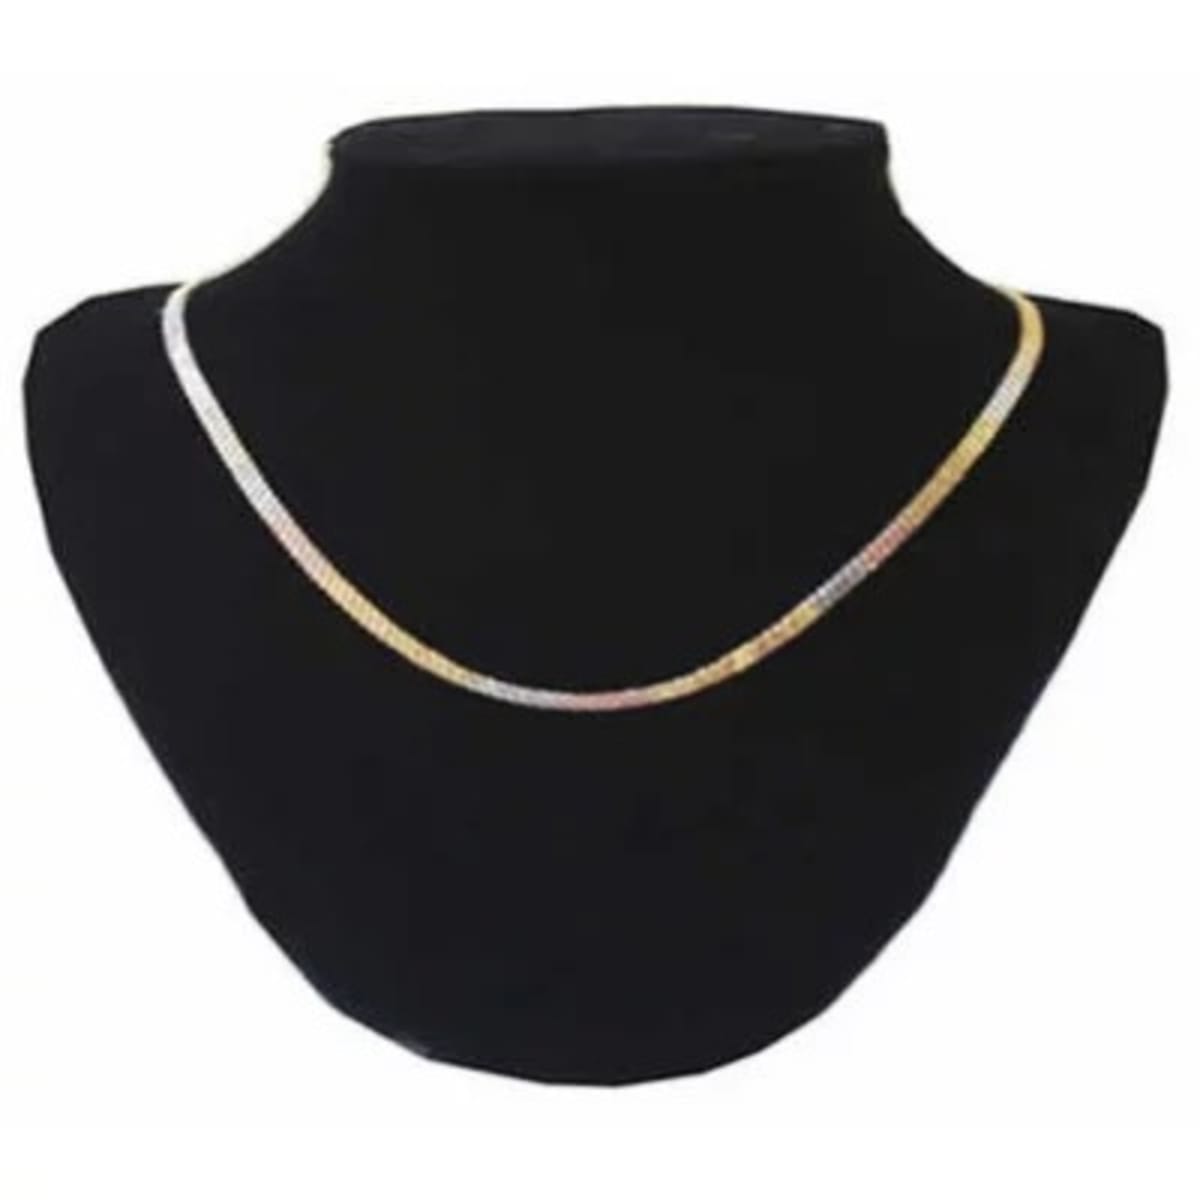 Buy Tri Layer 3 Tone Oval Beads Sterling Silver Chain Necklace by Mannash™  Jewellery